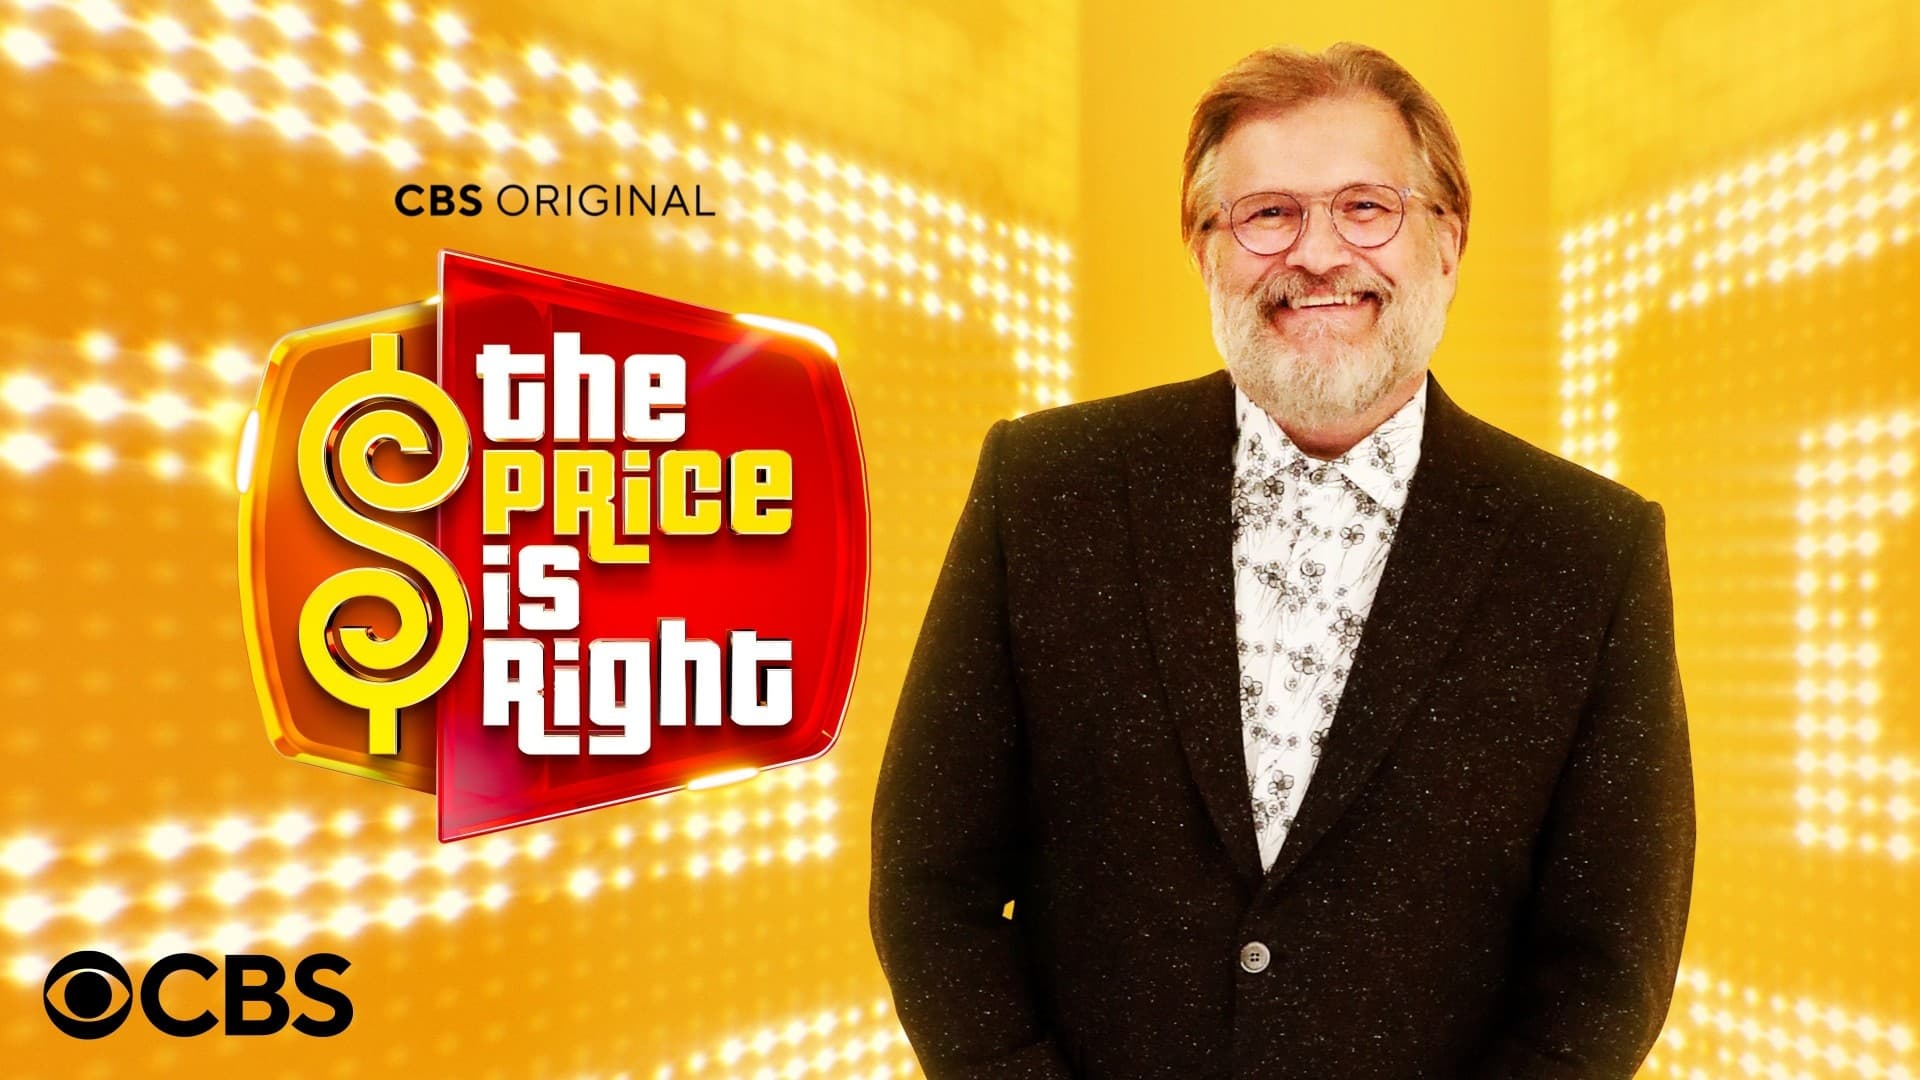 The Price Is Right - Season 36 Episode 173 : The Price Is Right Season 36 Episode 173